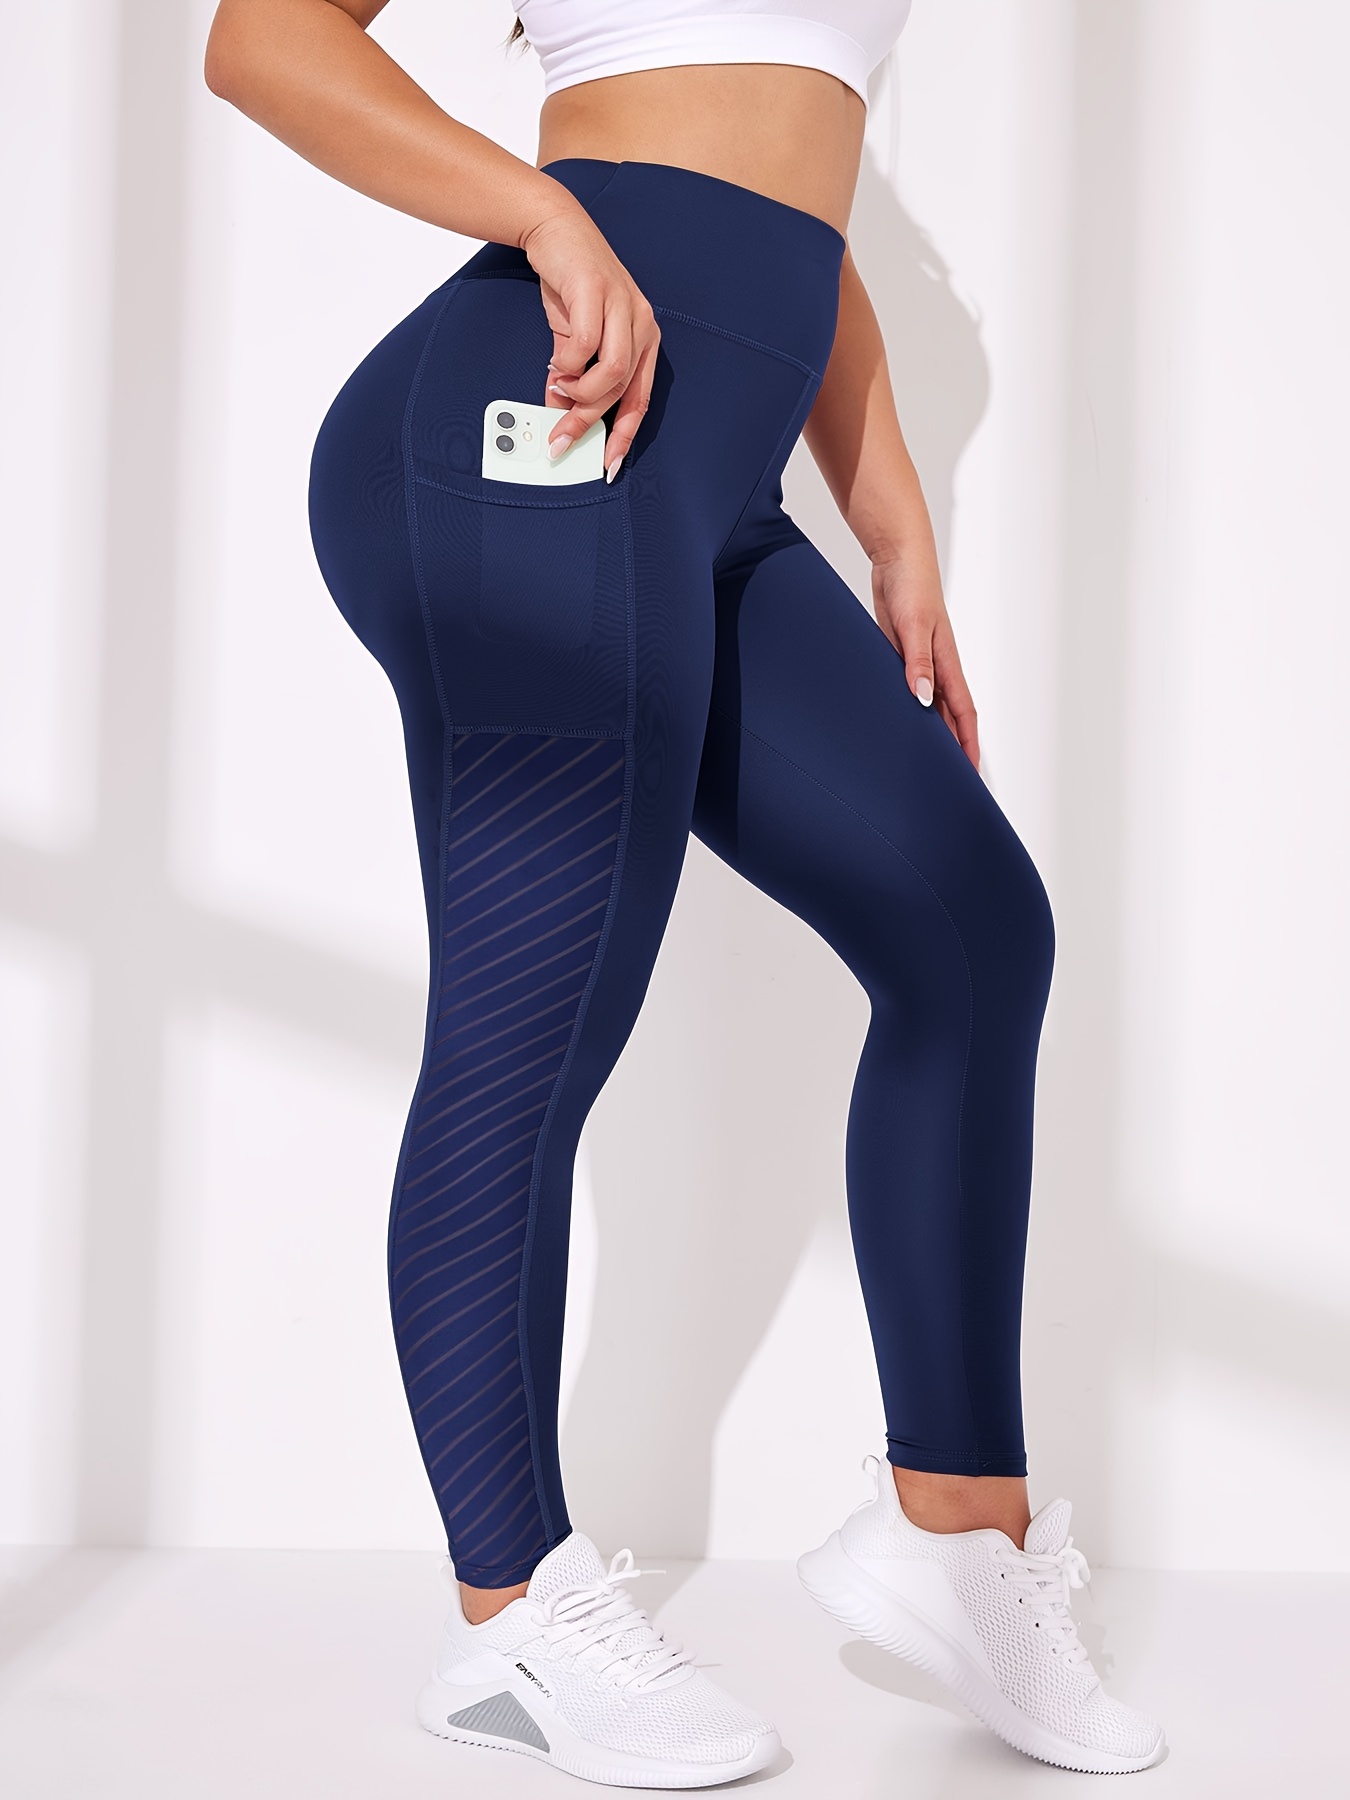 High Waisted Leggings with Pockets for Women - Buttery Soft, Non See  Through, Yoga Workout Pants